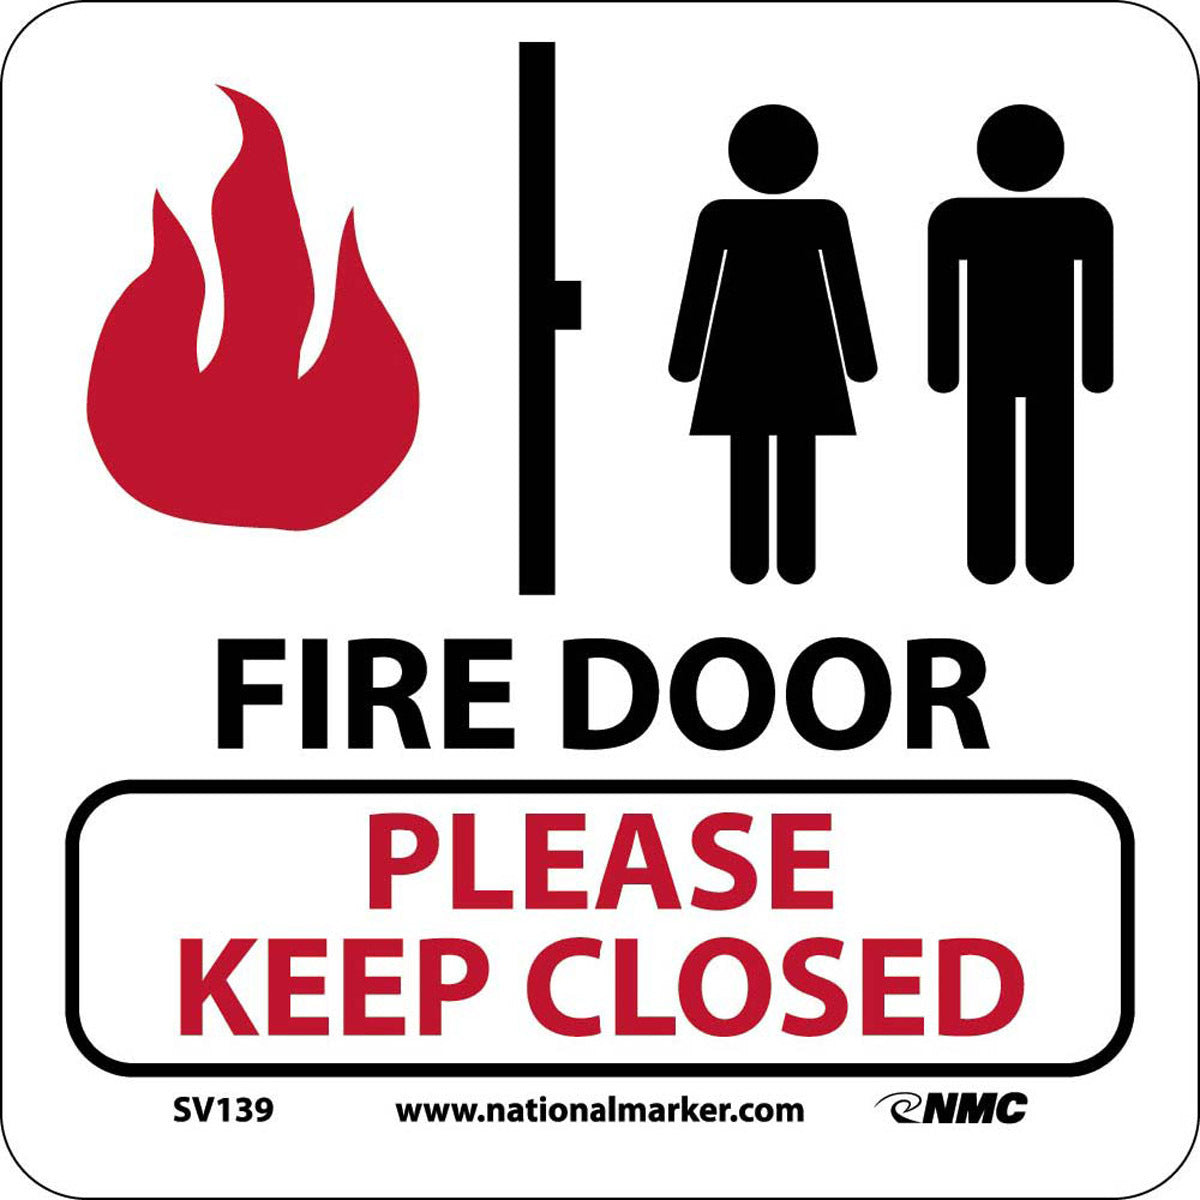 NM 7" X 7" White Acrylic Fire Safety Sign "FIRE DOOR PLEASE KEEP CLOSED"